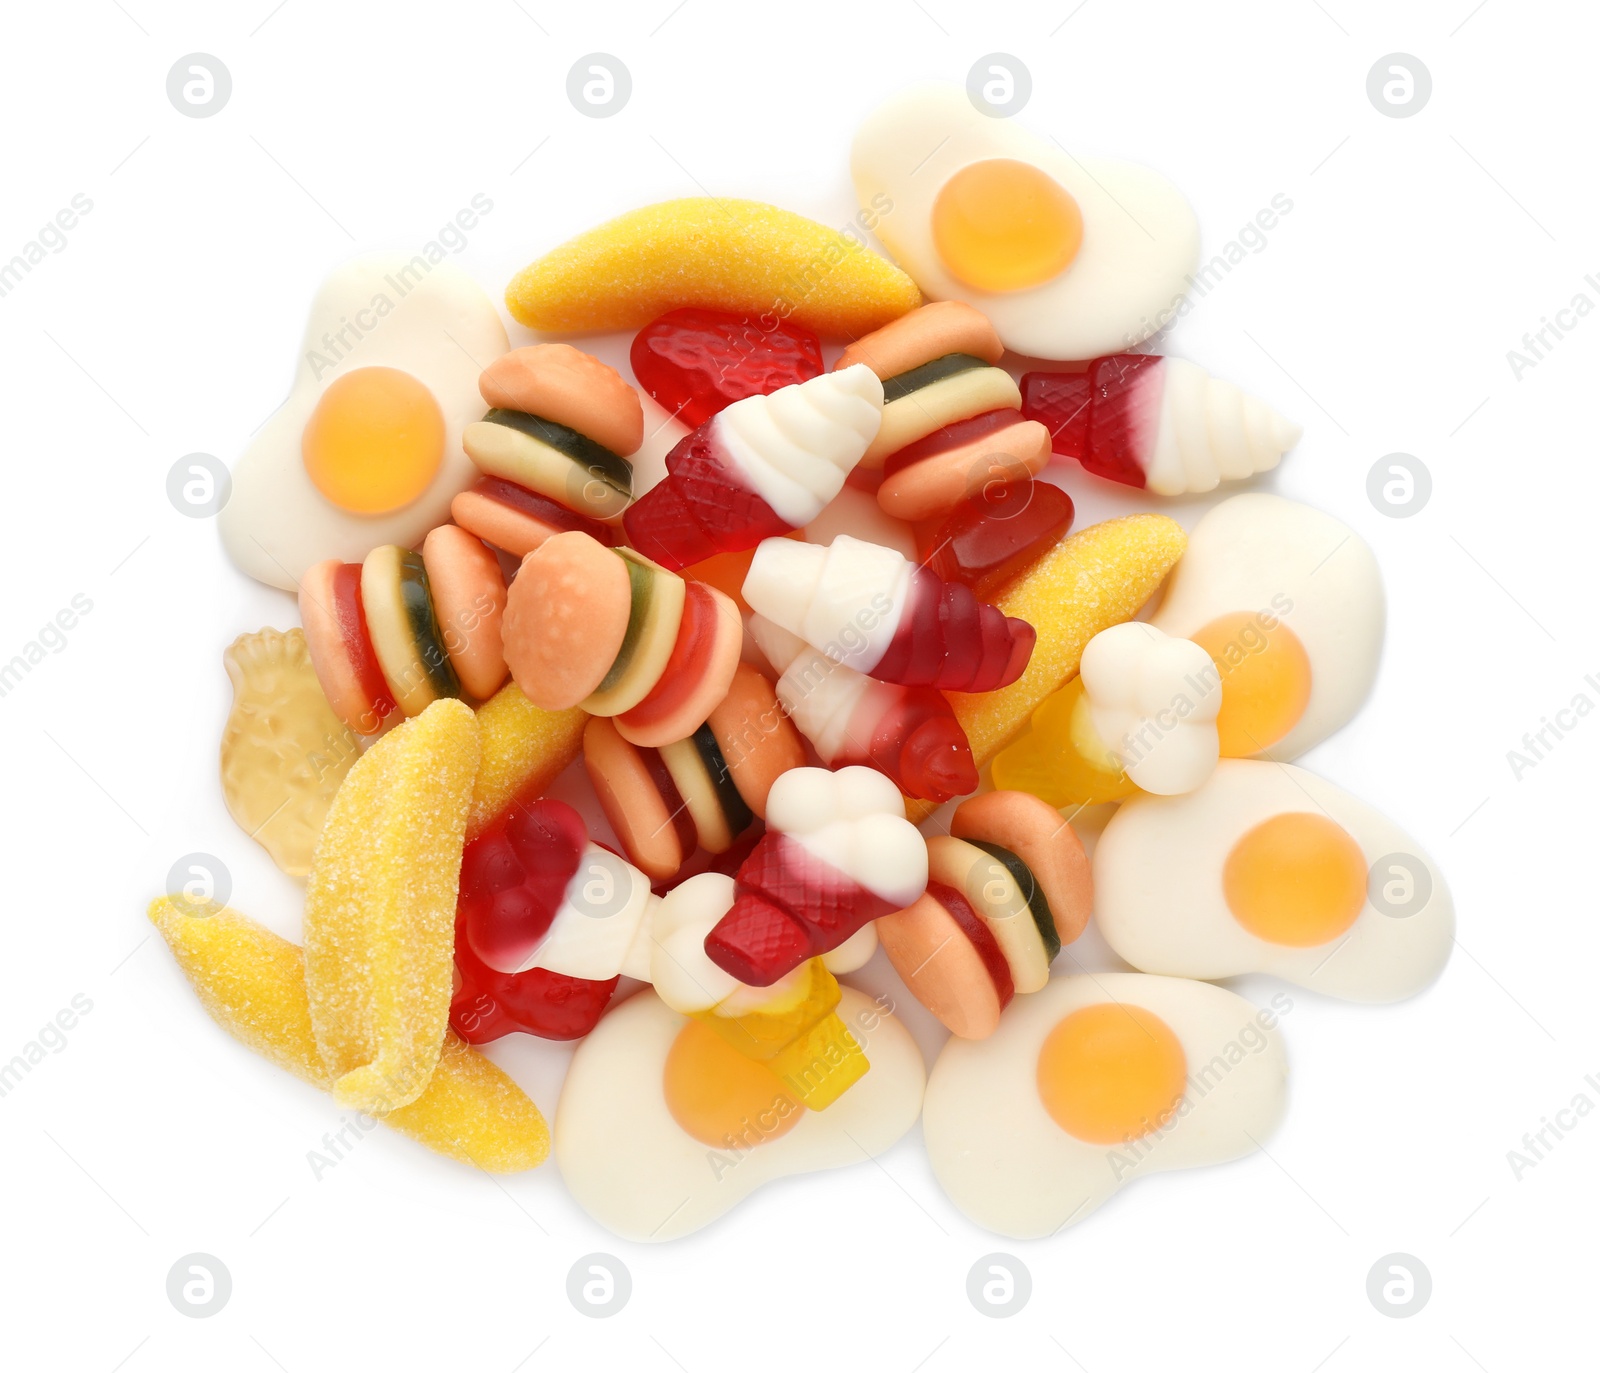 Photo of Pile of different tasty jelly candies on white background, top view